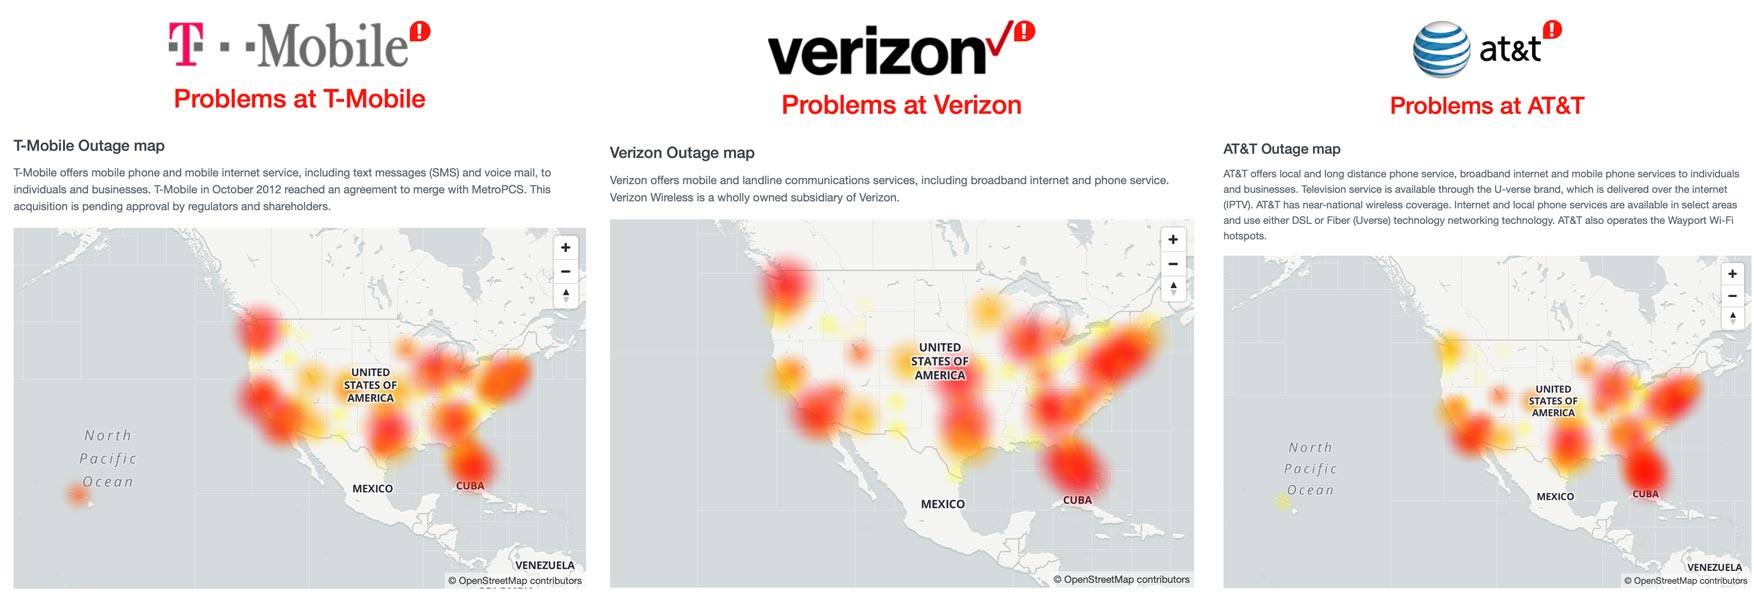 US Mobile Carriers Outage Map